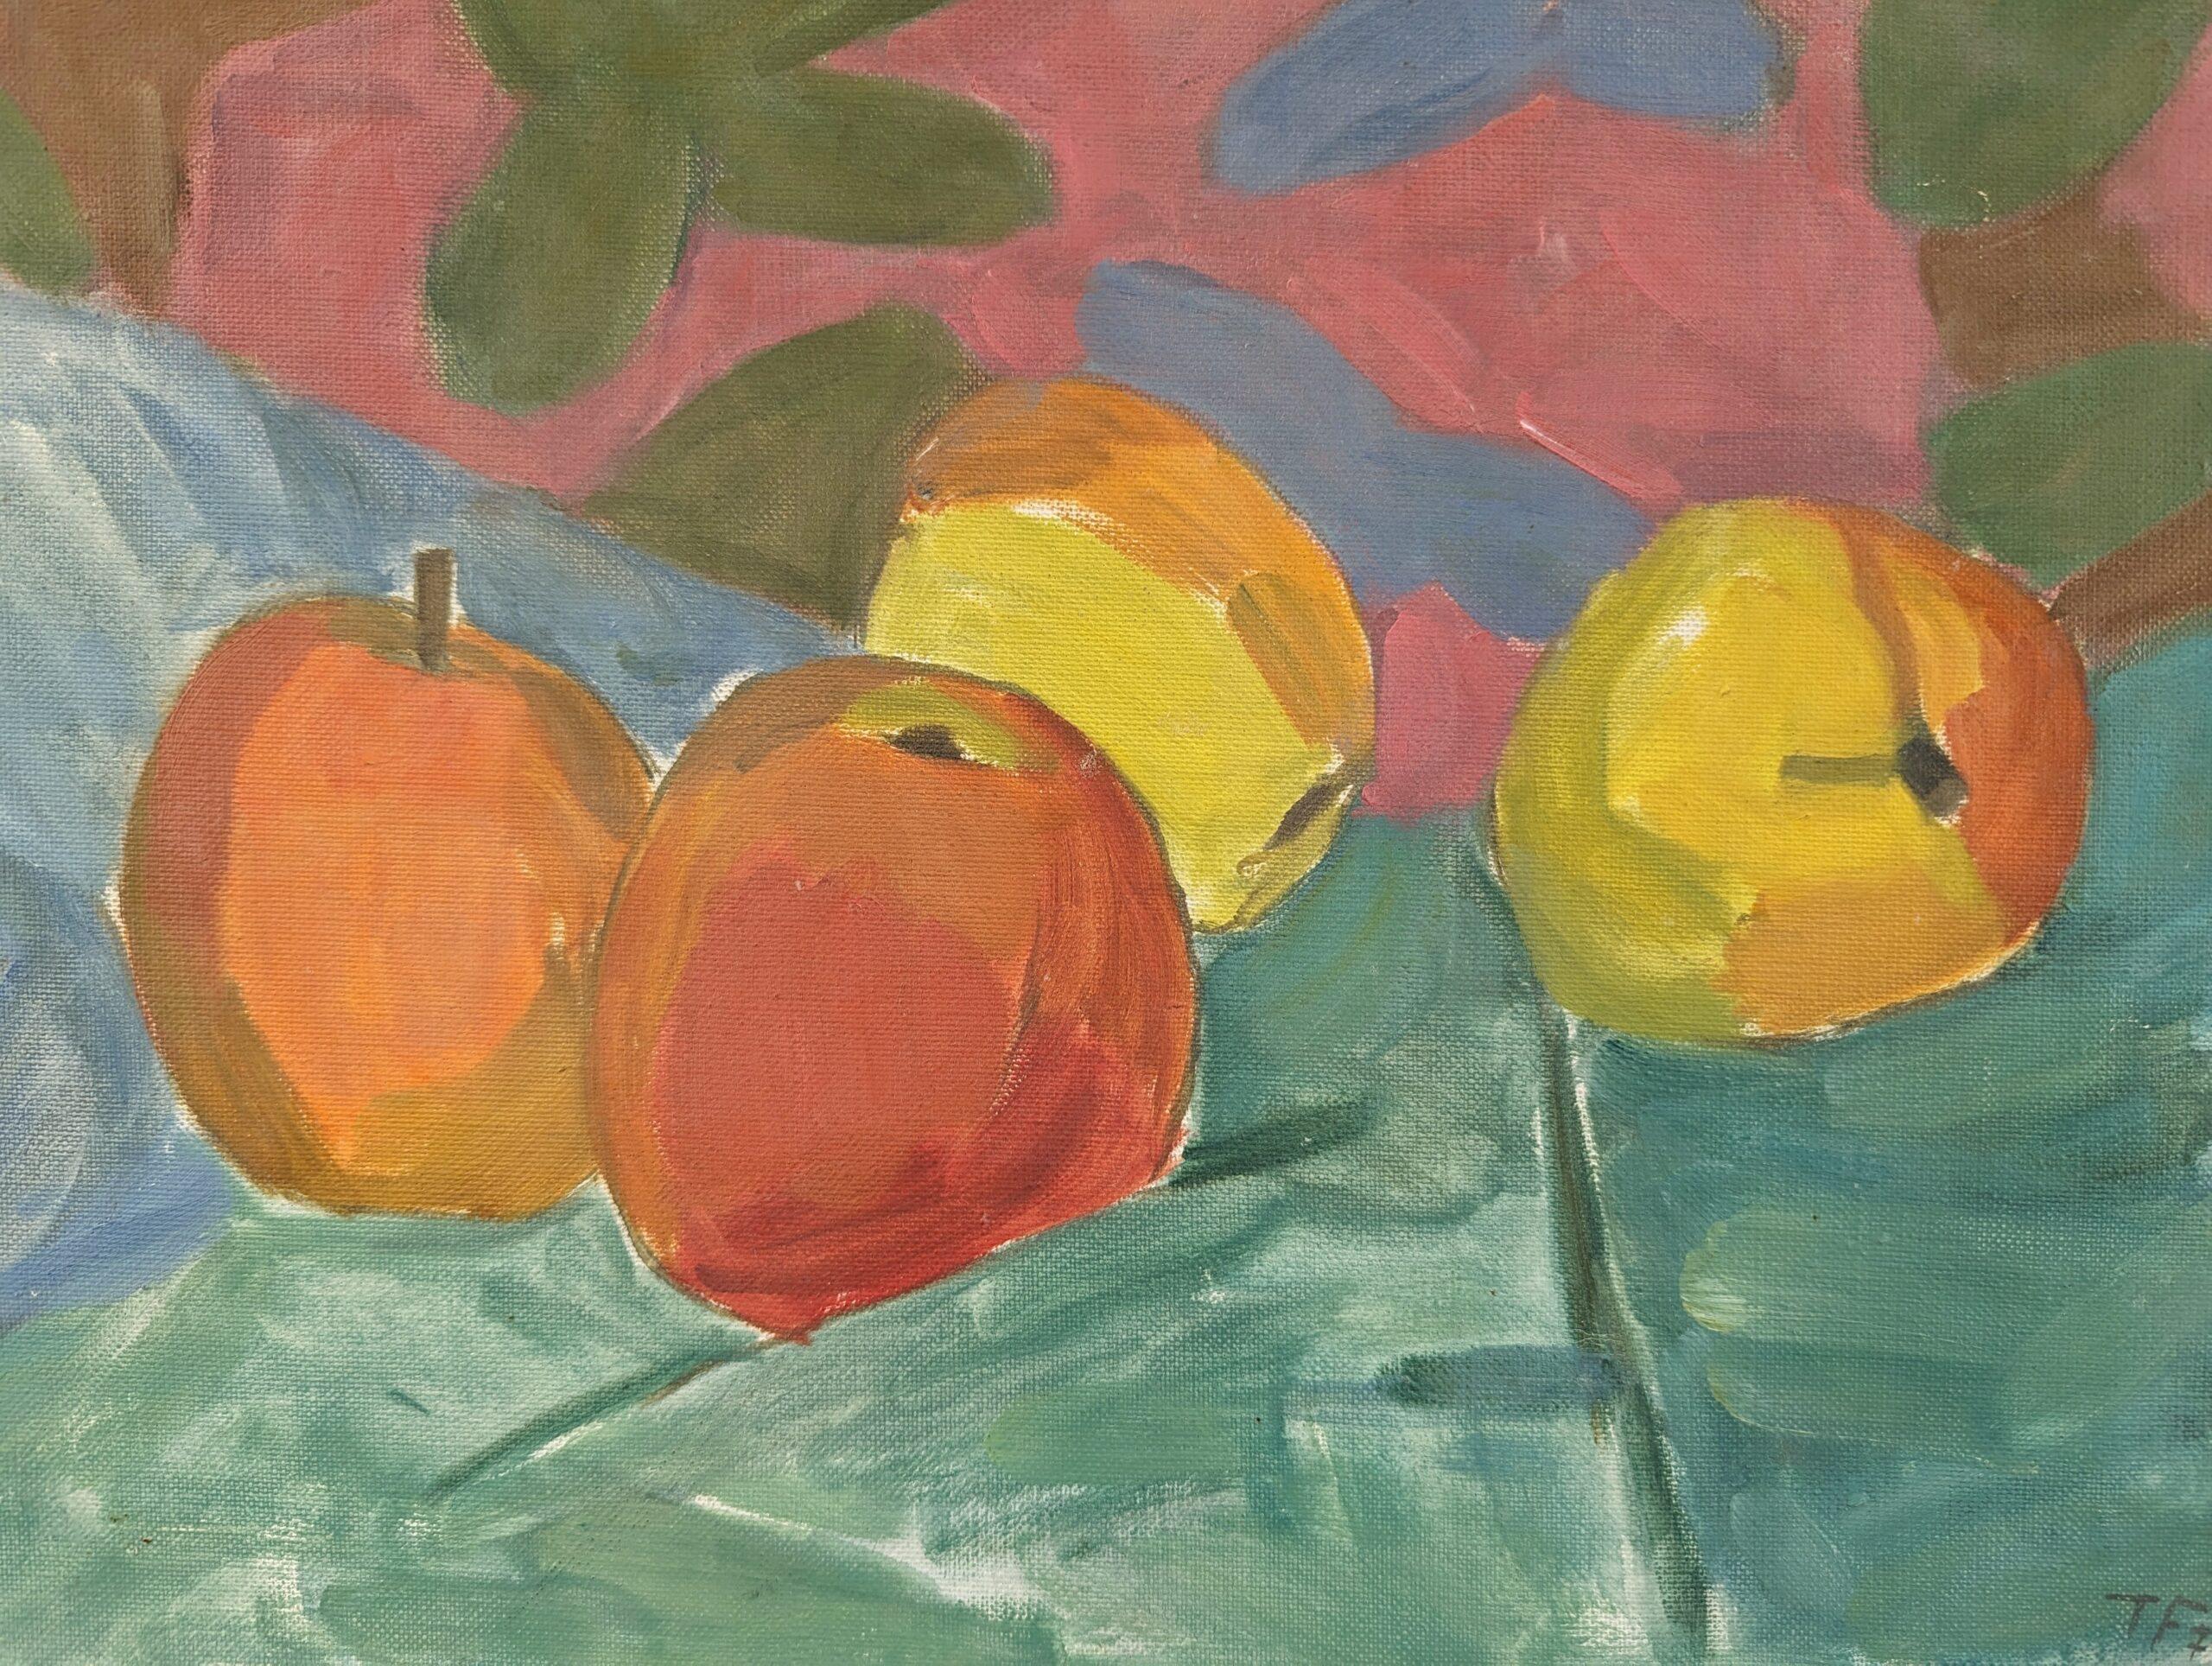 1974 Mid-Century Modern Still Life Oil Painting by Ture Fabiansson - Four Apples 8